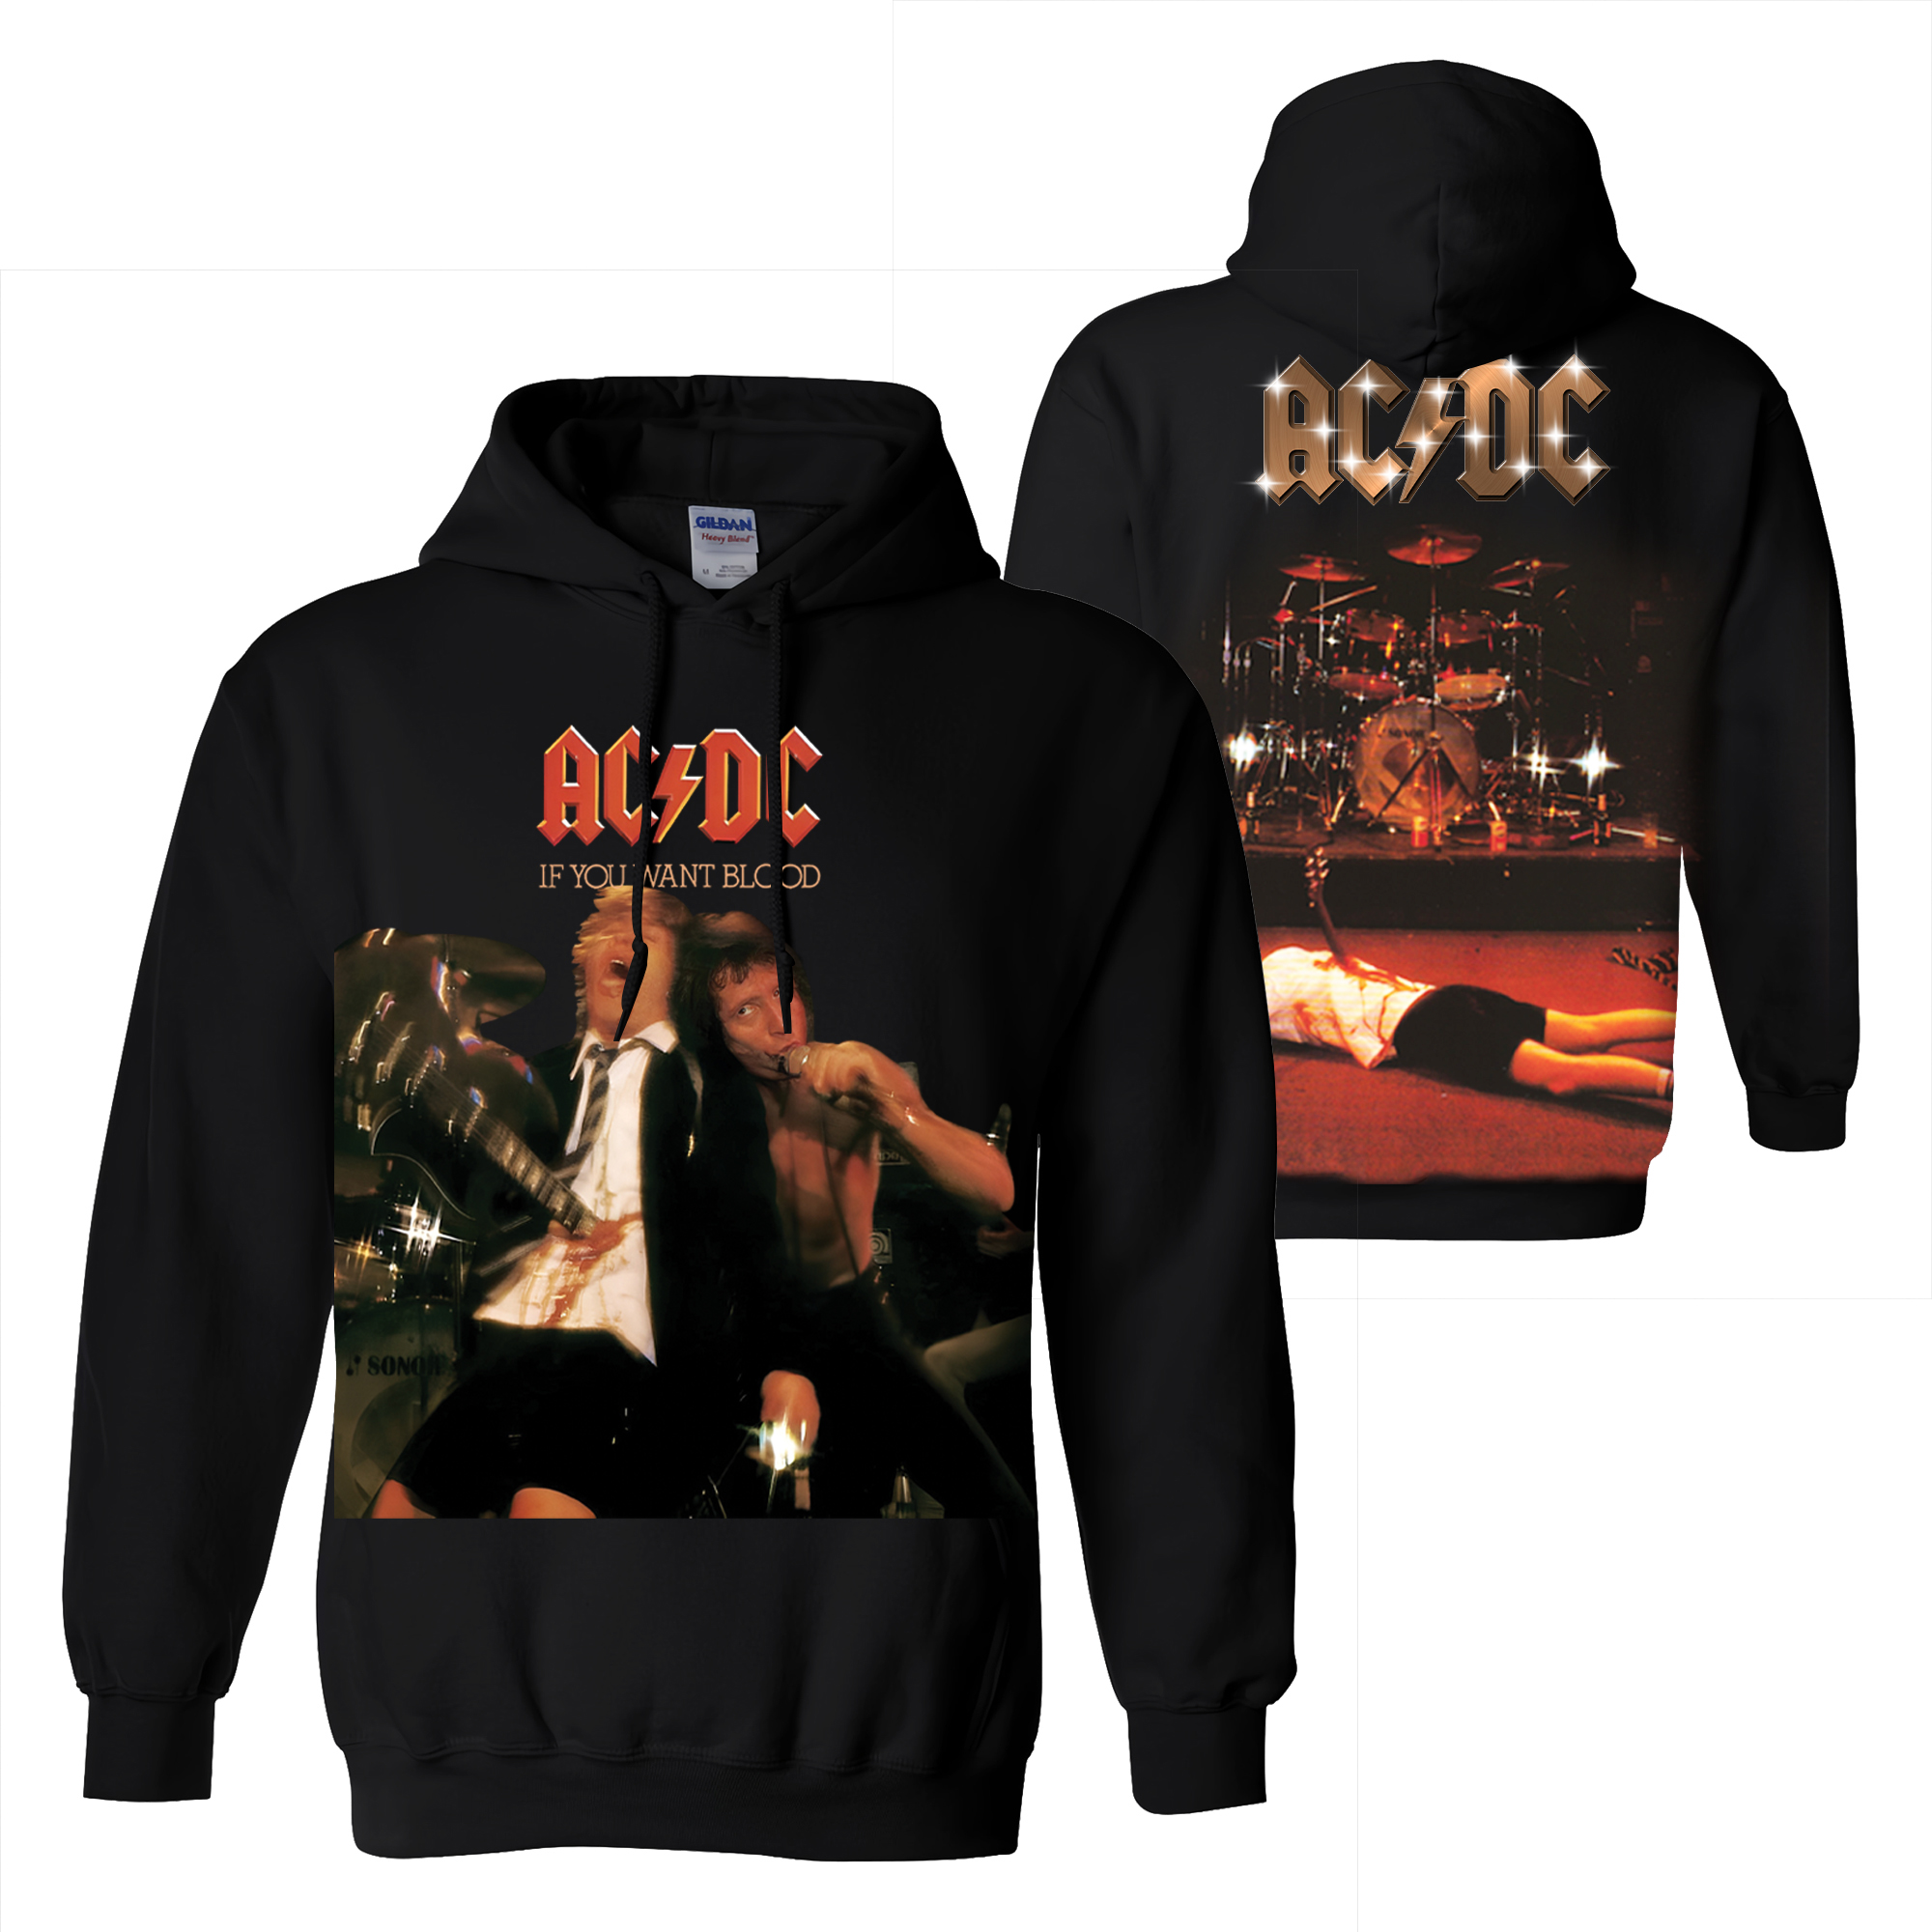 ACDC If you want blood 2d hoodie